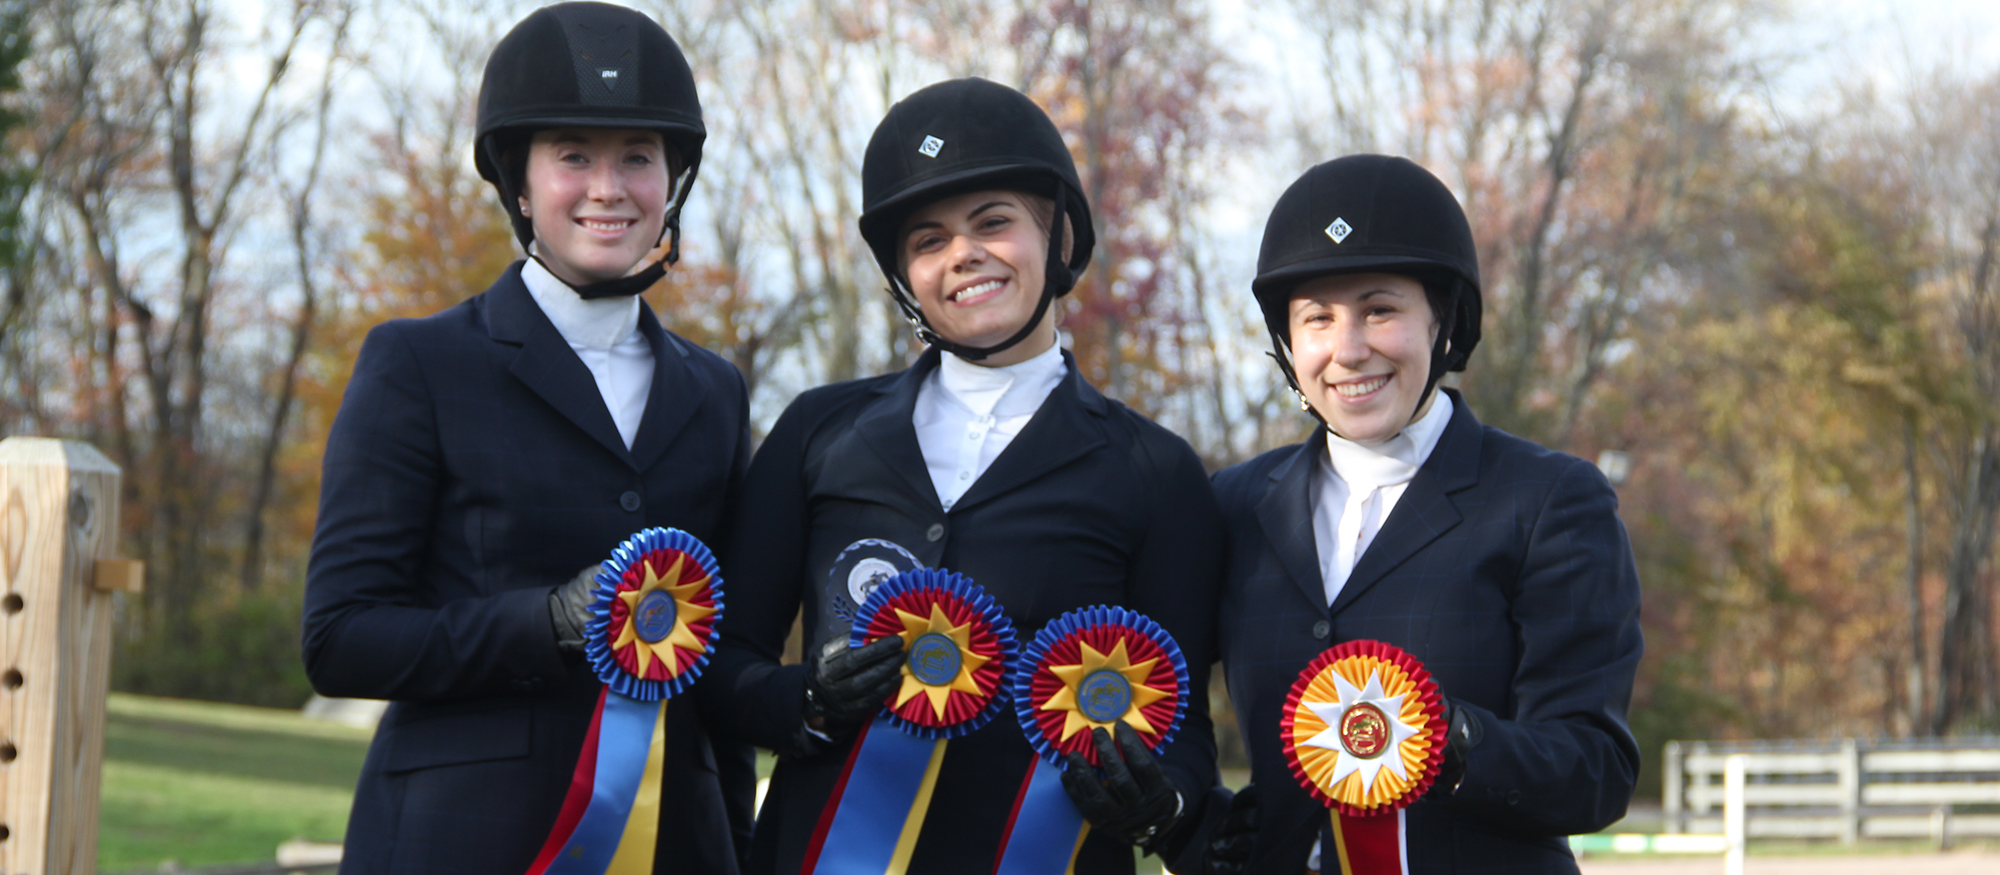 Photo featuring Lyons riders (from left to right): Anna Rzchowski, Libby Sams and Kaziah Brachfeld, who all earned individual honors at the October 28 home show at the MHC Equestrian Center.